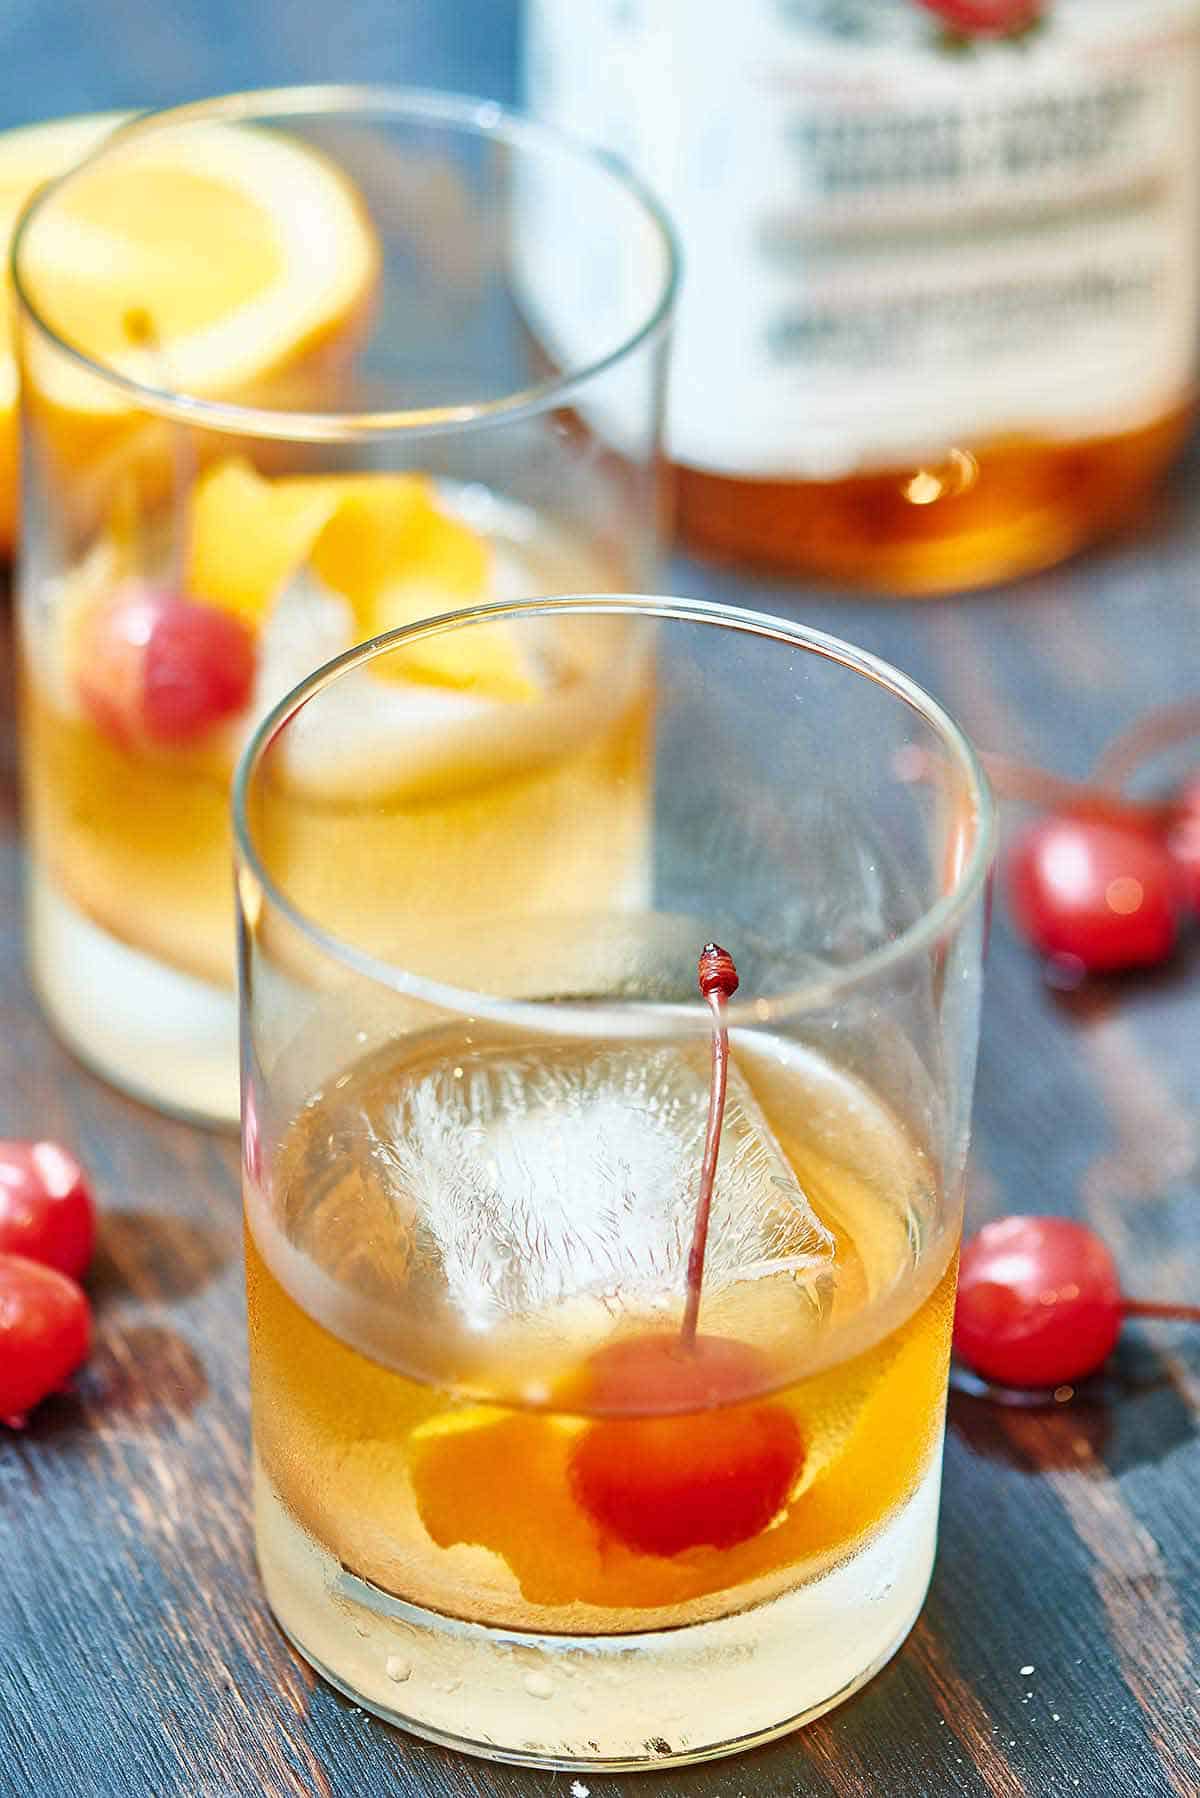 Old Fashioned Cocktail Recipe - Classic Whiskey Cocktail